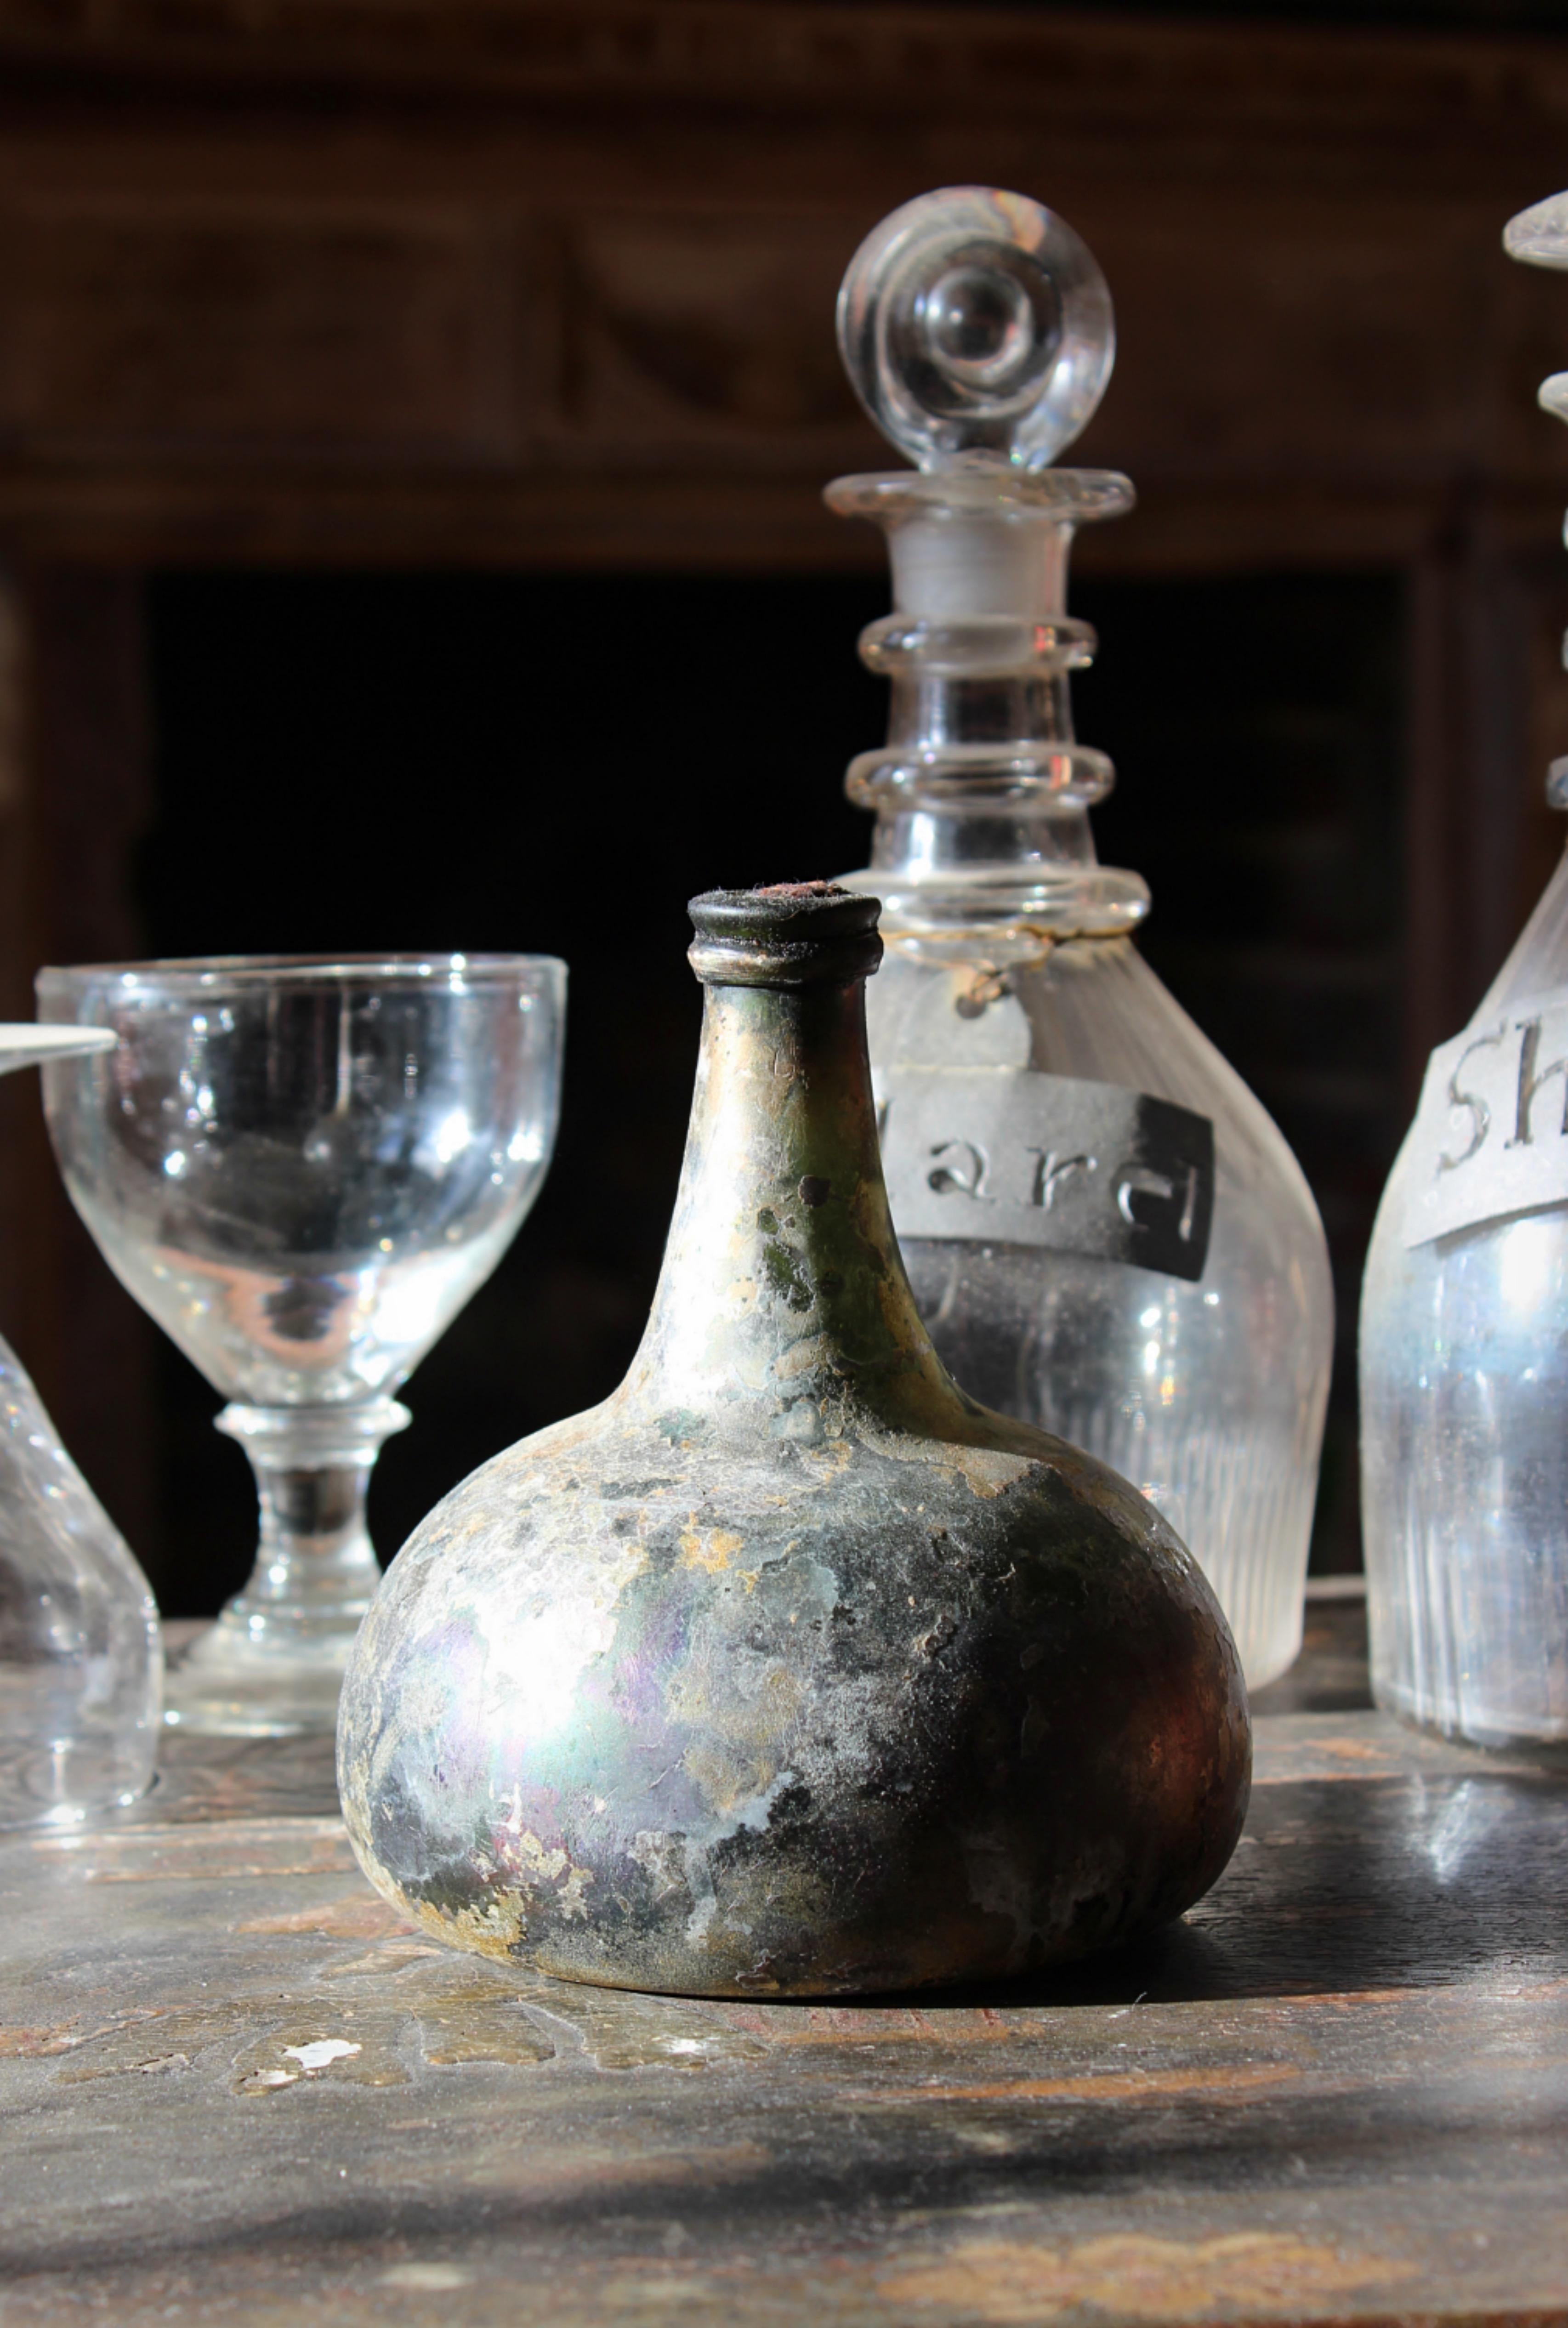 Dutch “ onion “ bottle, salvaged from the shipwreck of Vliegend Hert circa 1981. 

The bottle has a large amount of its original contents contained by its original cork but does weep if tipped.

The bottles surface is beautifully iridescent from